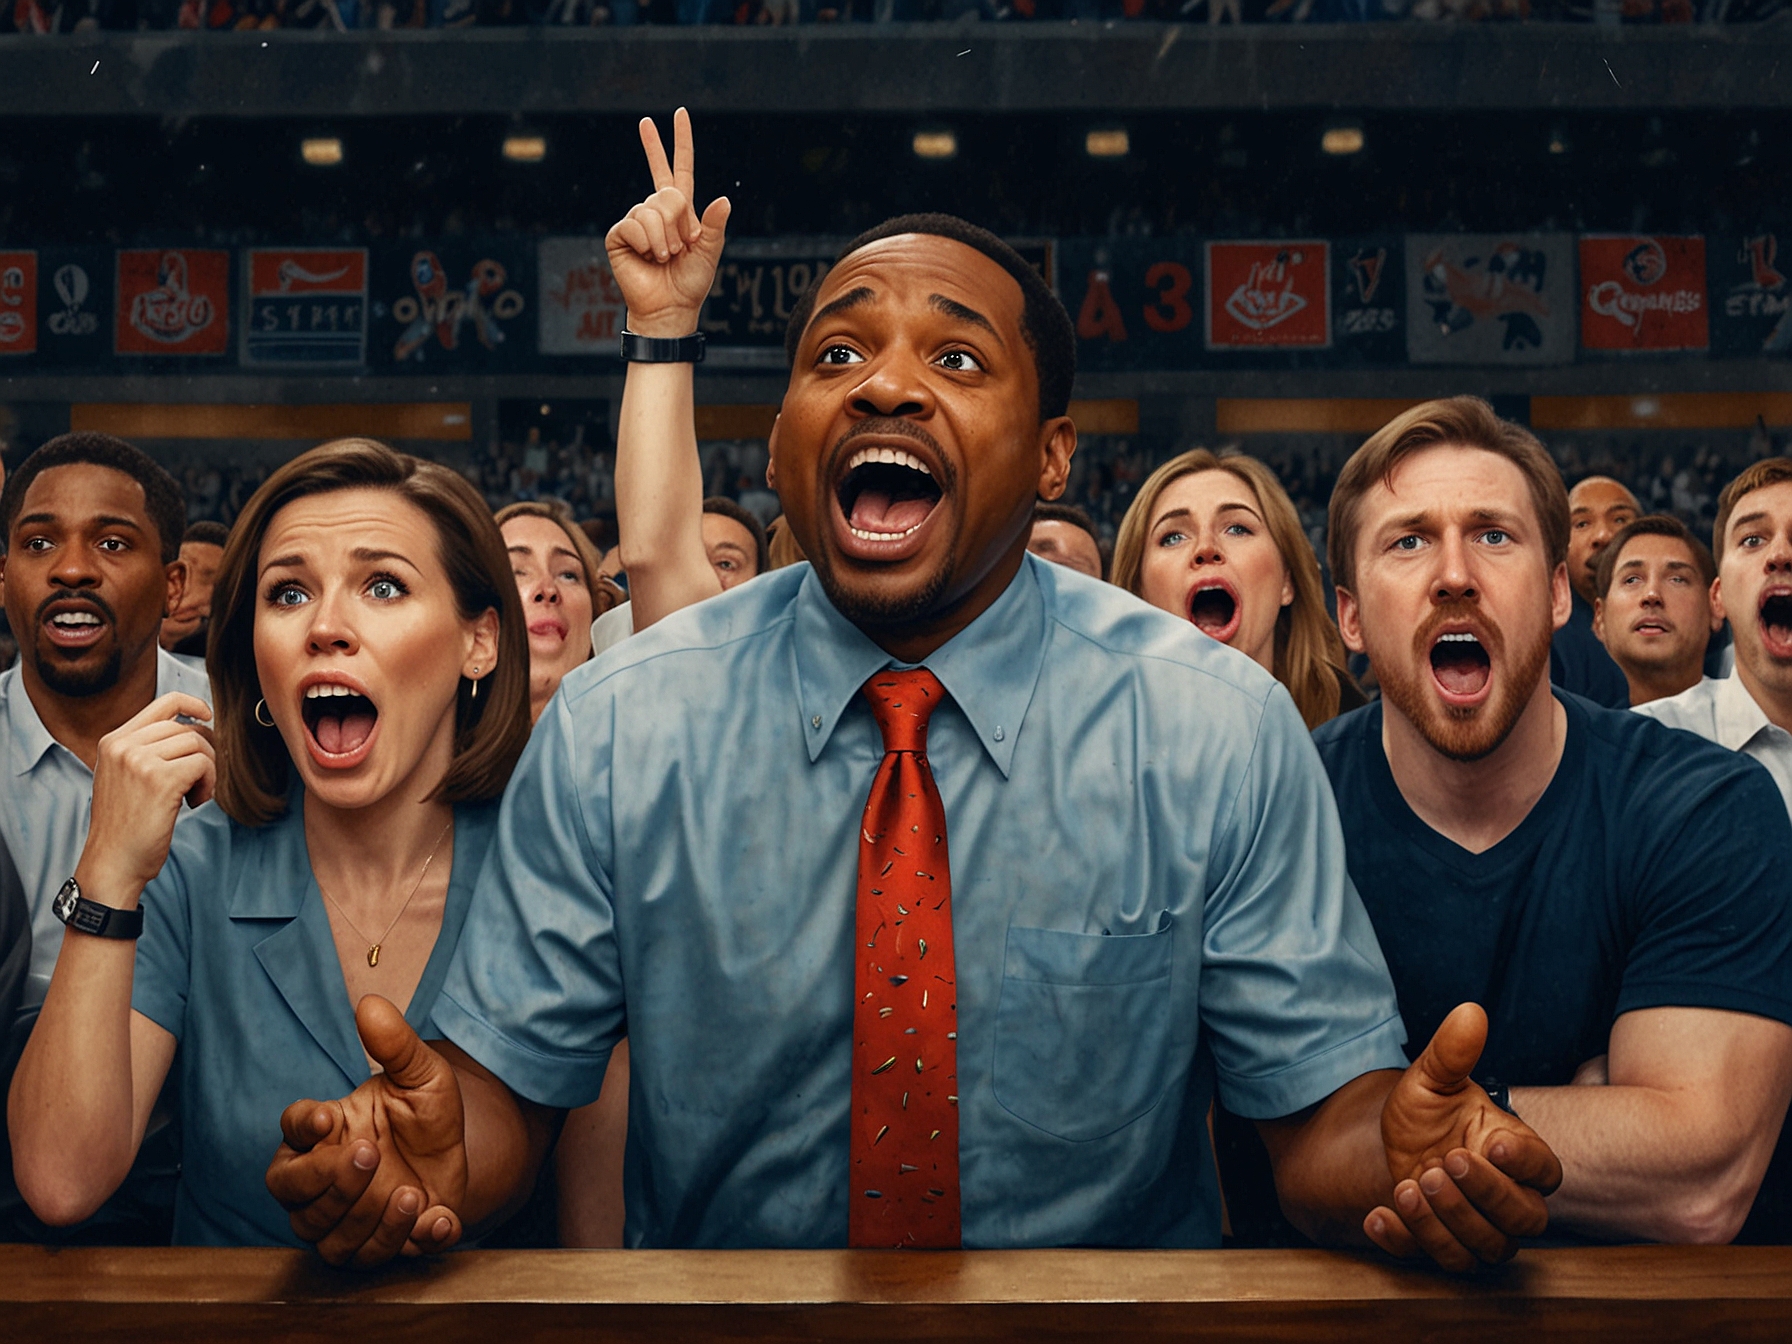 Visual representation of sports fans reacting with mixed emotions to the announcement of Stephen A. Smith's $20 million contract, emphasizing the divide in public opinion.